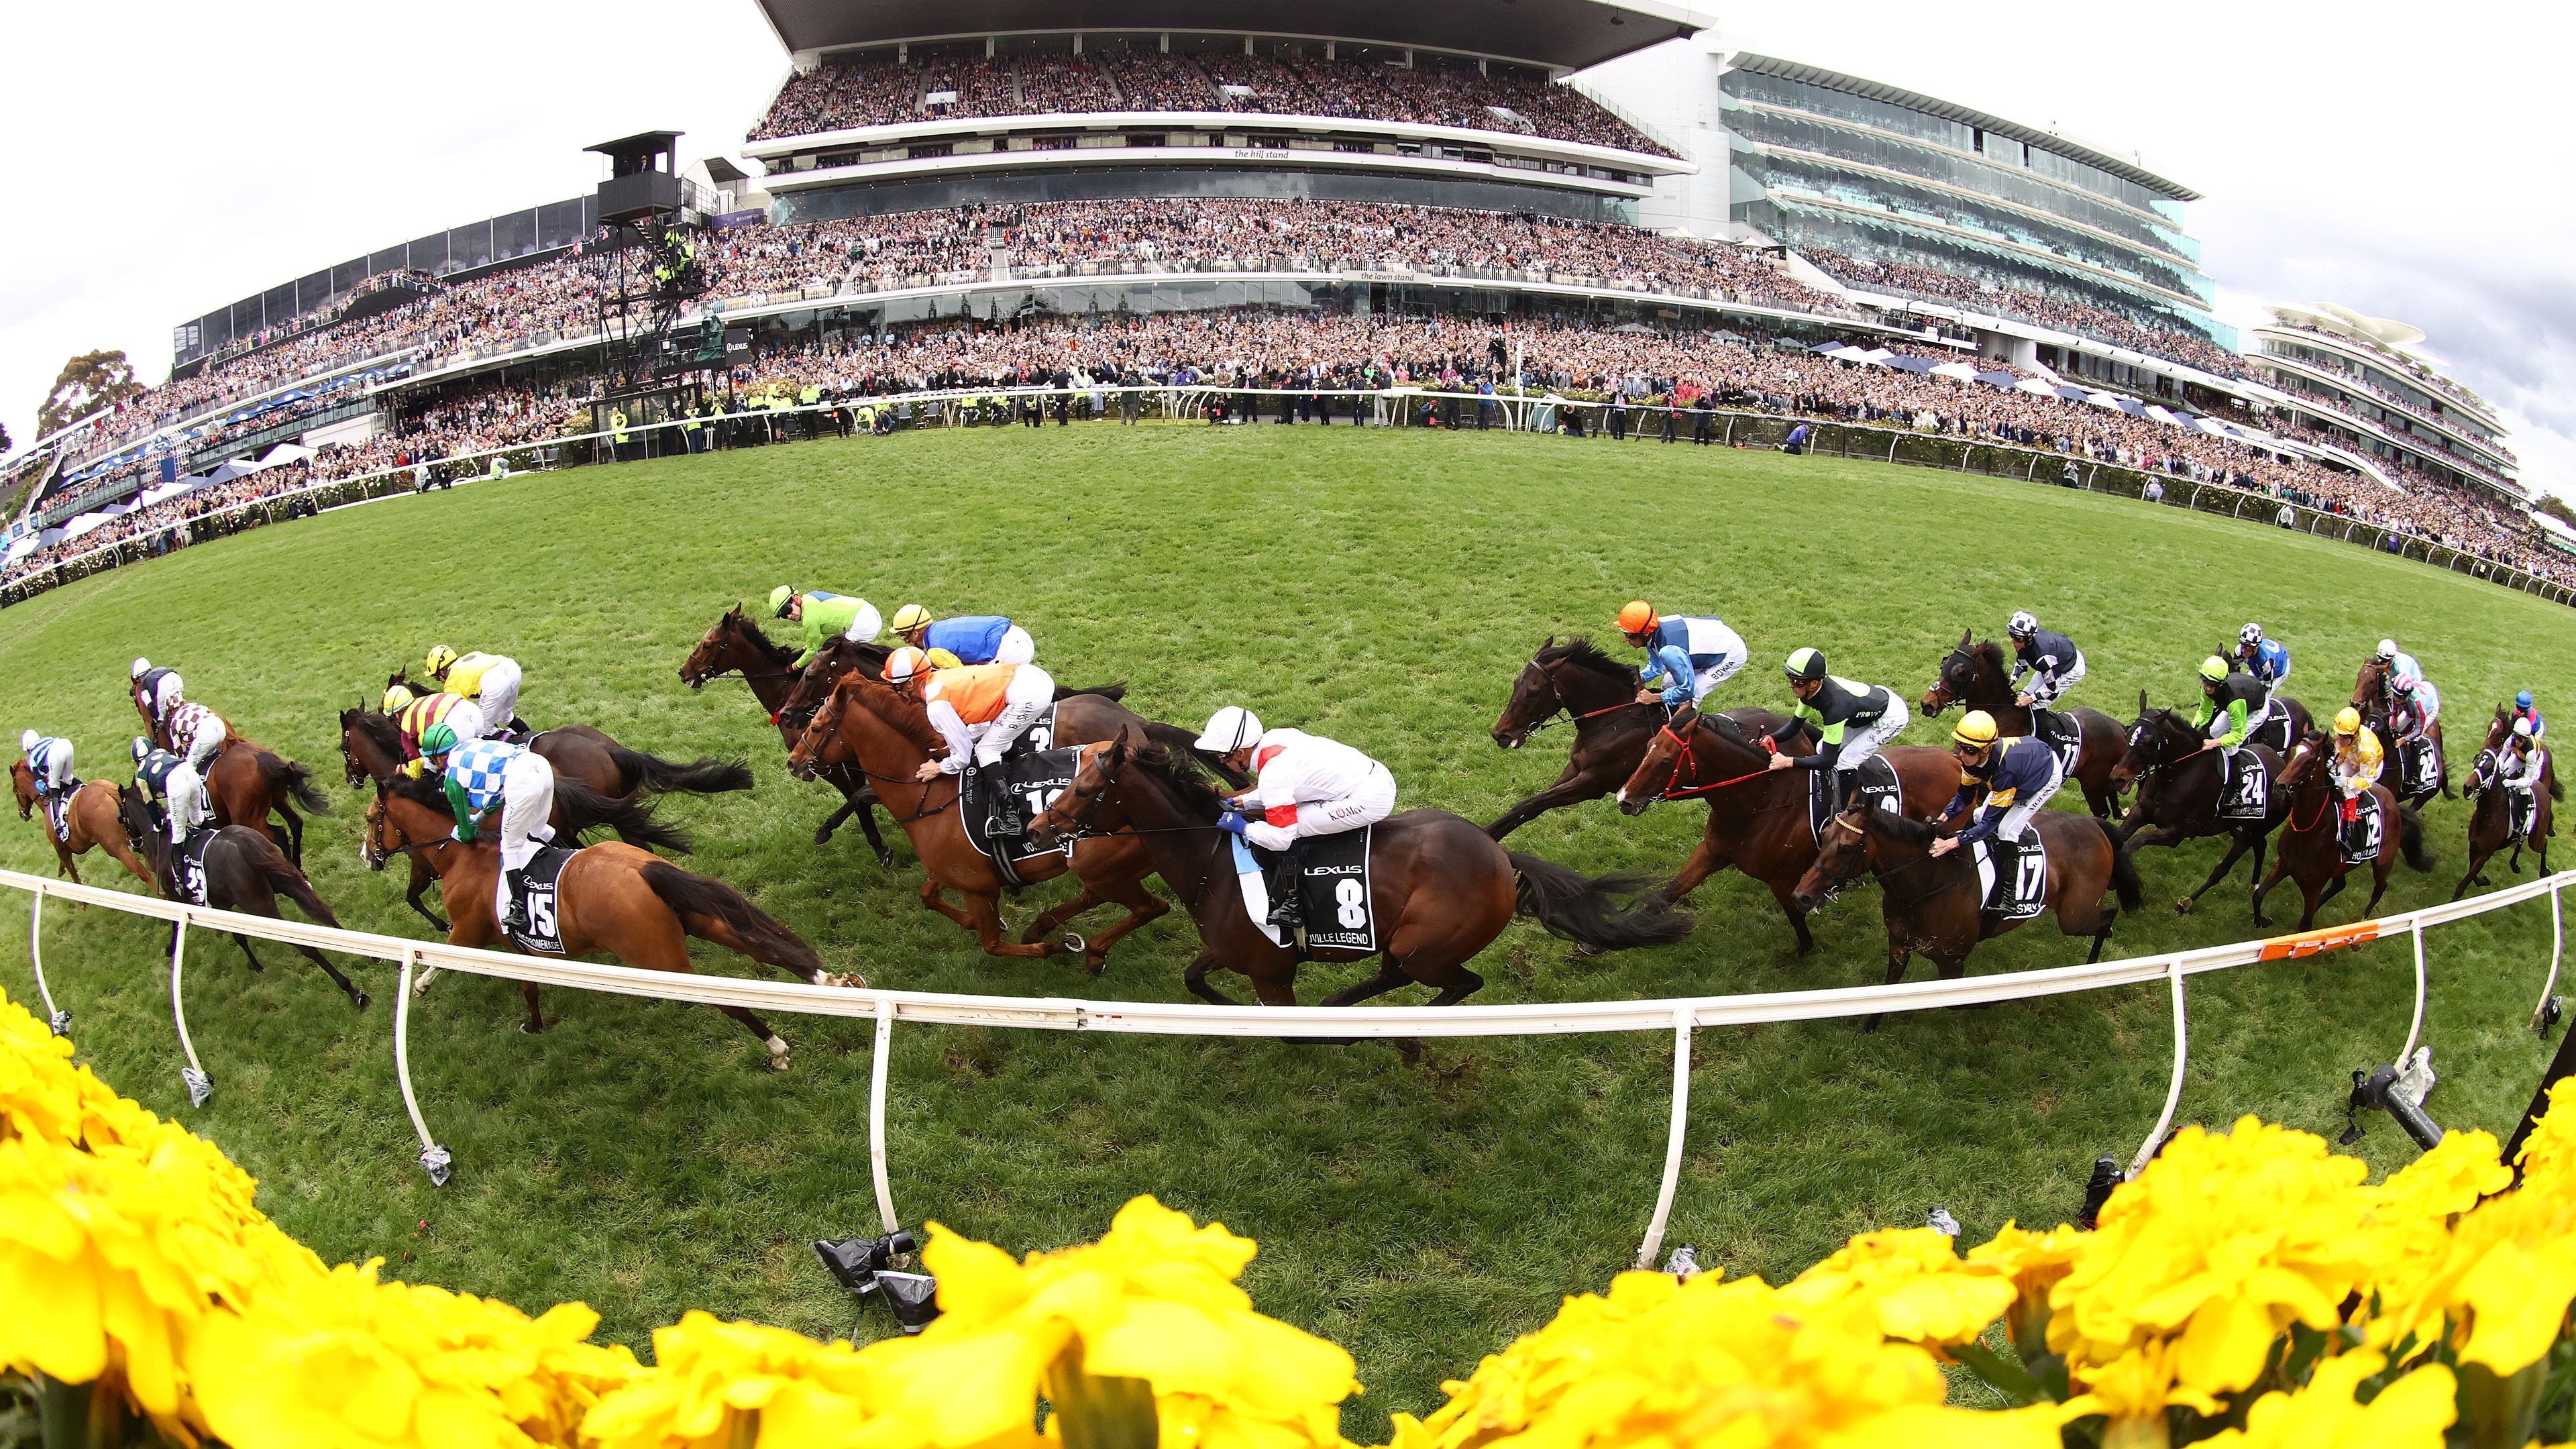 Who came last in the 2022 Melbourne Cup?